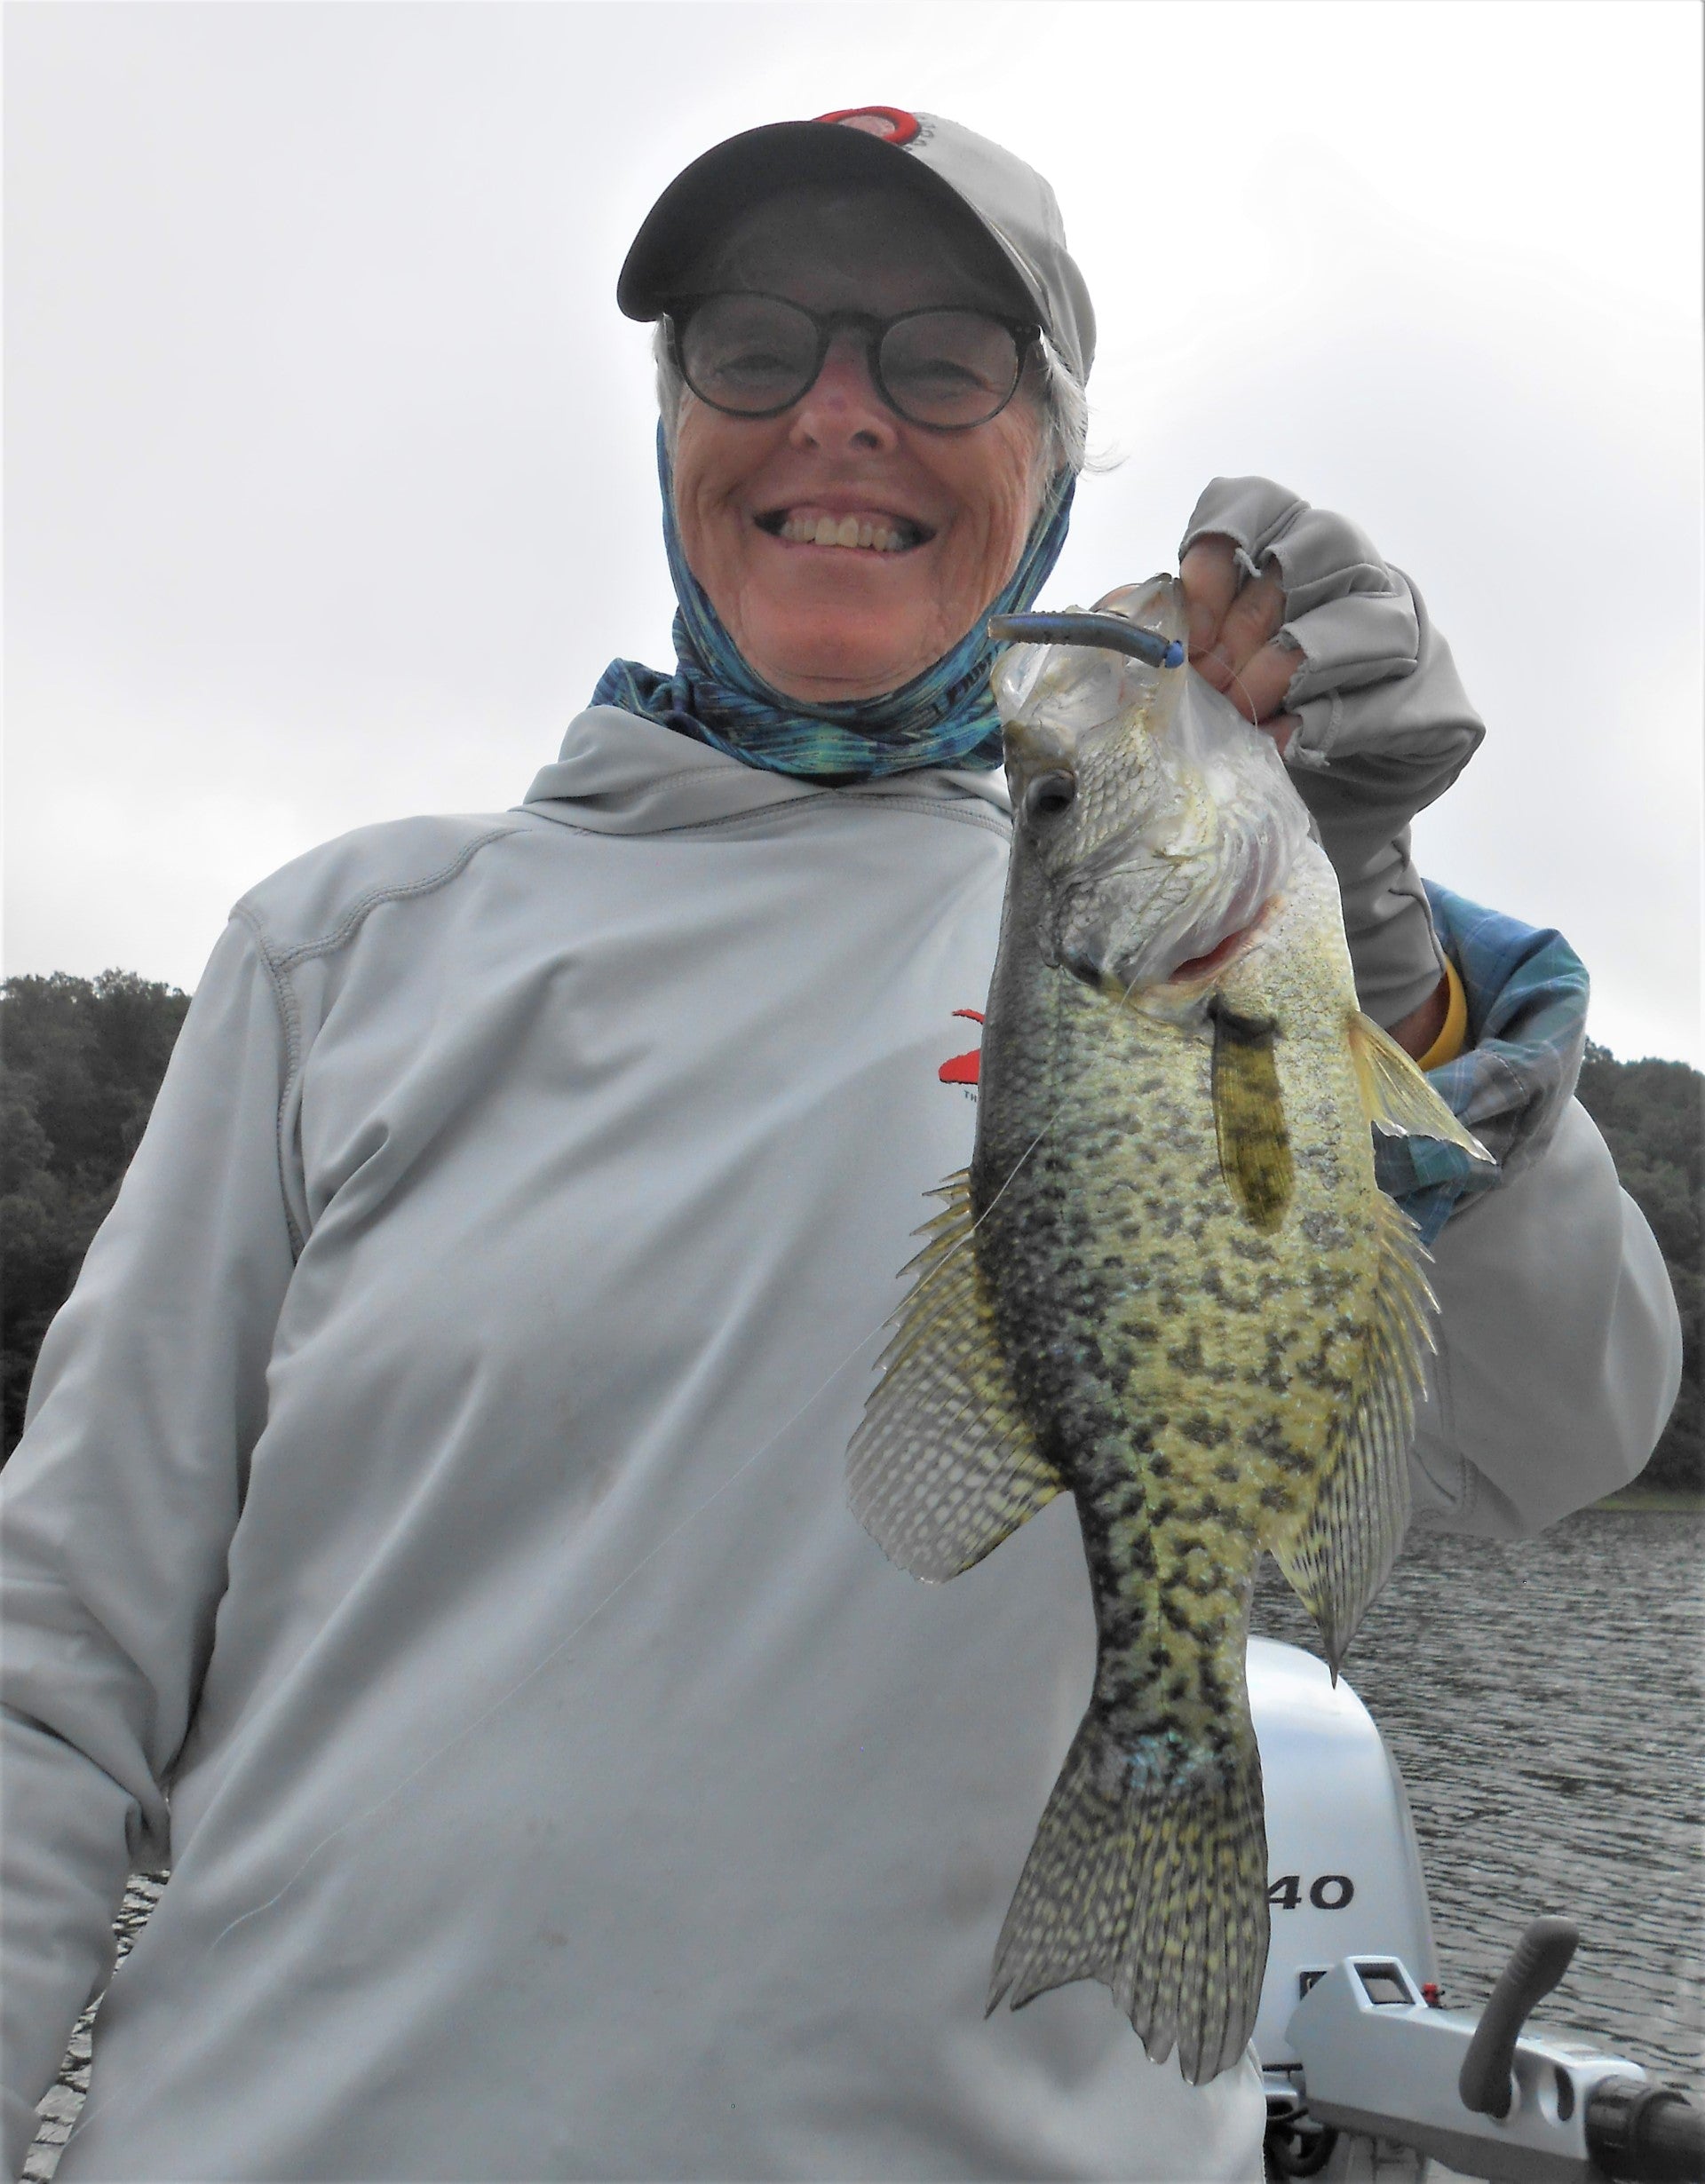 Pattie with a Crappie caught on a Micro TRD